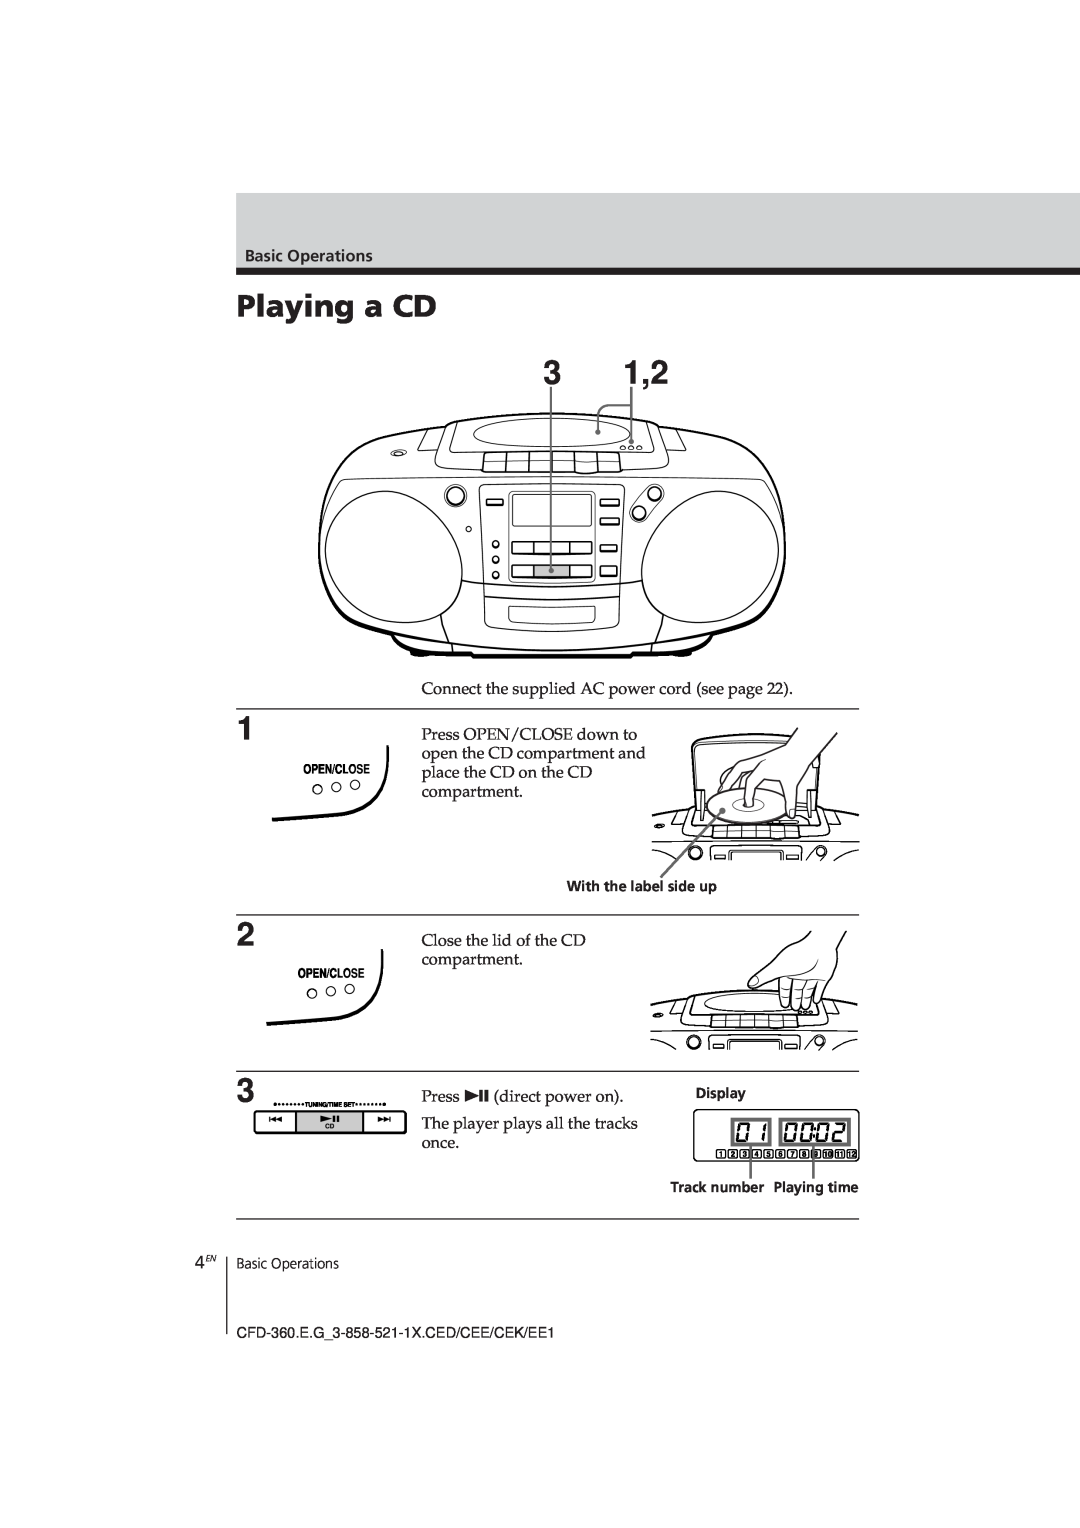 Sony CFD-360 3 1,2, Playing a CD, With the label side up, Display, Basic Operations, Track number Playing time 